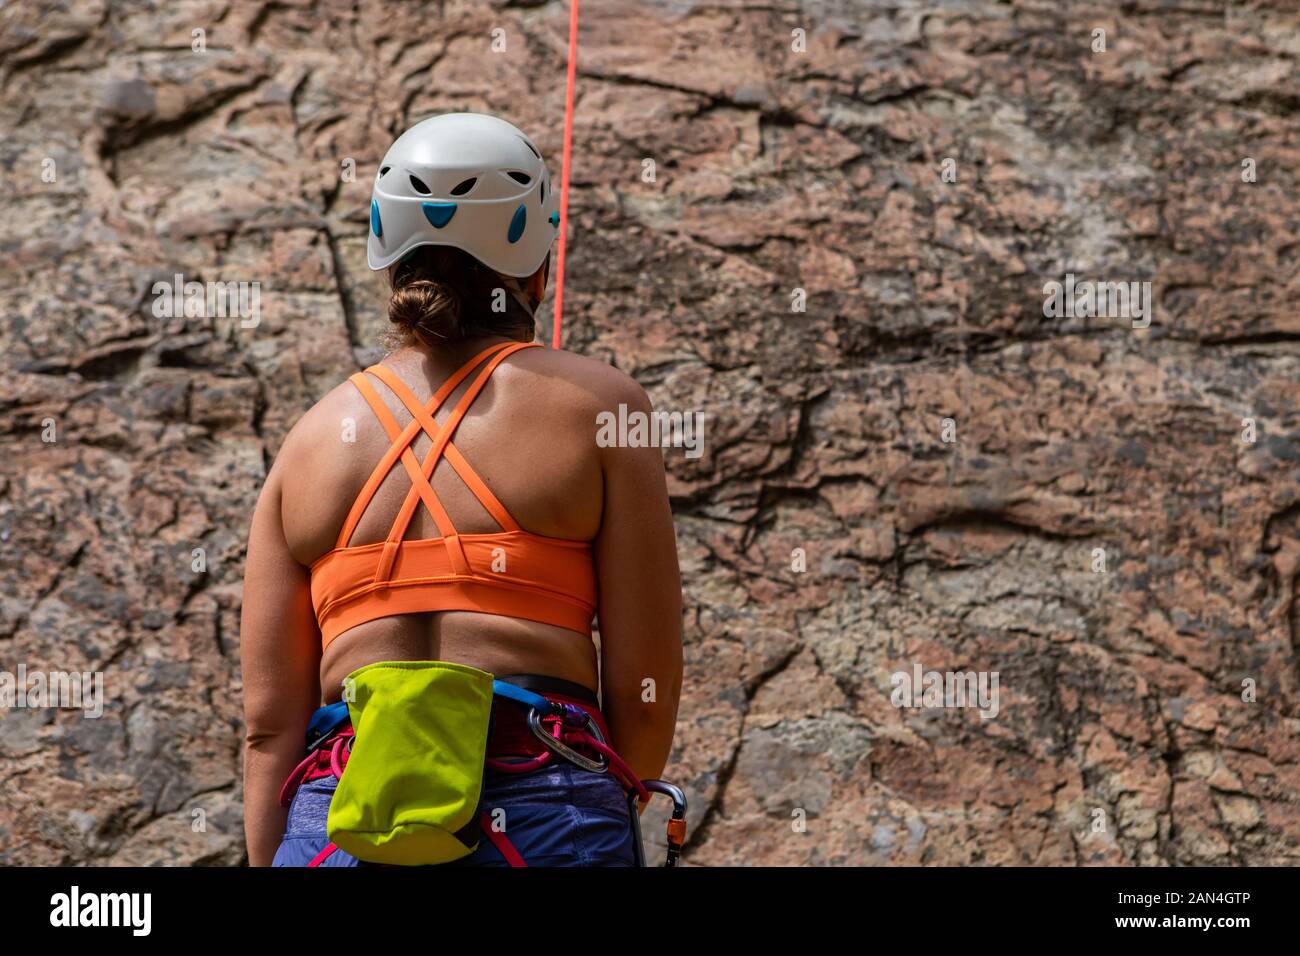 A close up and rear view of a healthy caucasian woman wearing orange vest, safety hat, harness and climbing gear during lead climbing a rock face Stock Photo